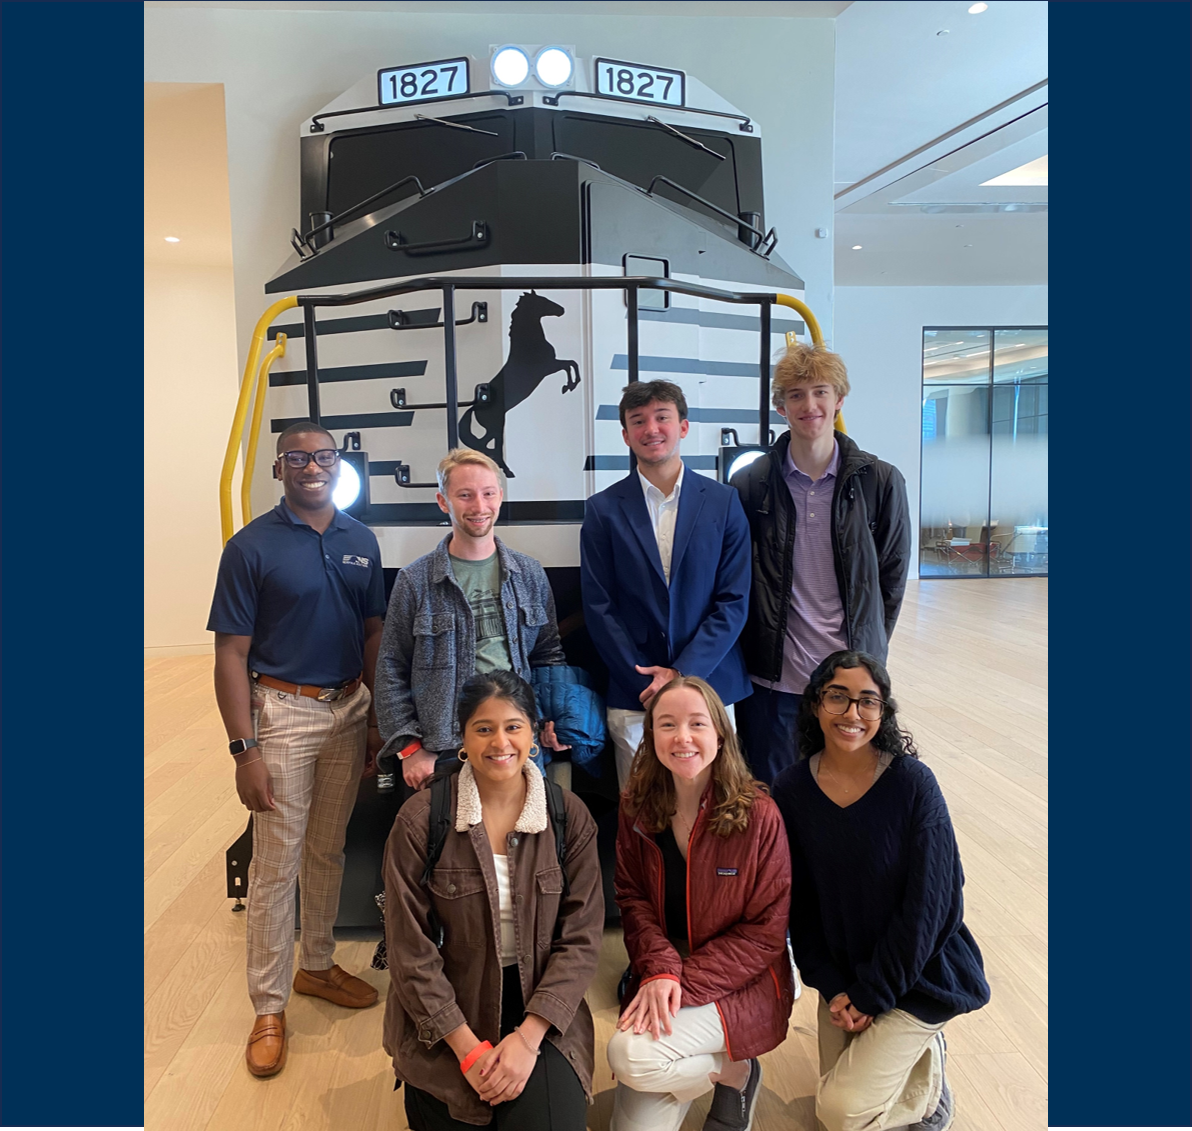 (Back row from L to R:) Norfolk Southern's Craig Conyers and UBAC team members Luke Ruane, Dillon Roberts, and Hank Hudson. (Front row from L to R: Anjali Shajan, Caitlin Gorman (UBAC co-president), and Nitika Gupta.